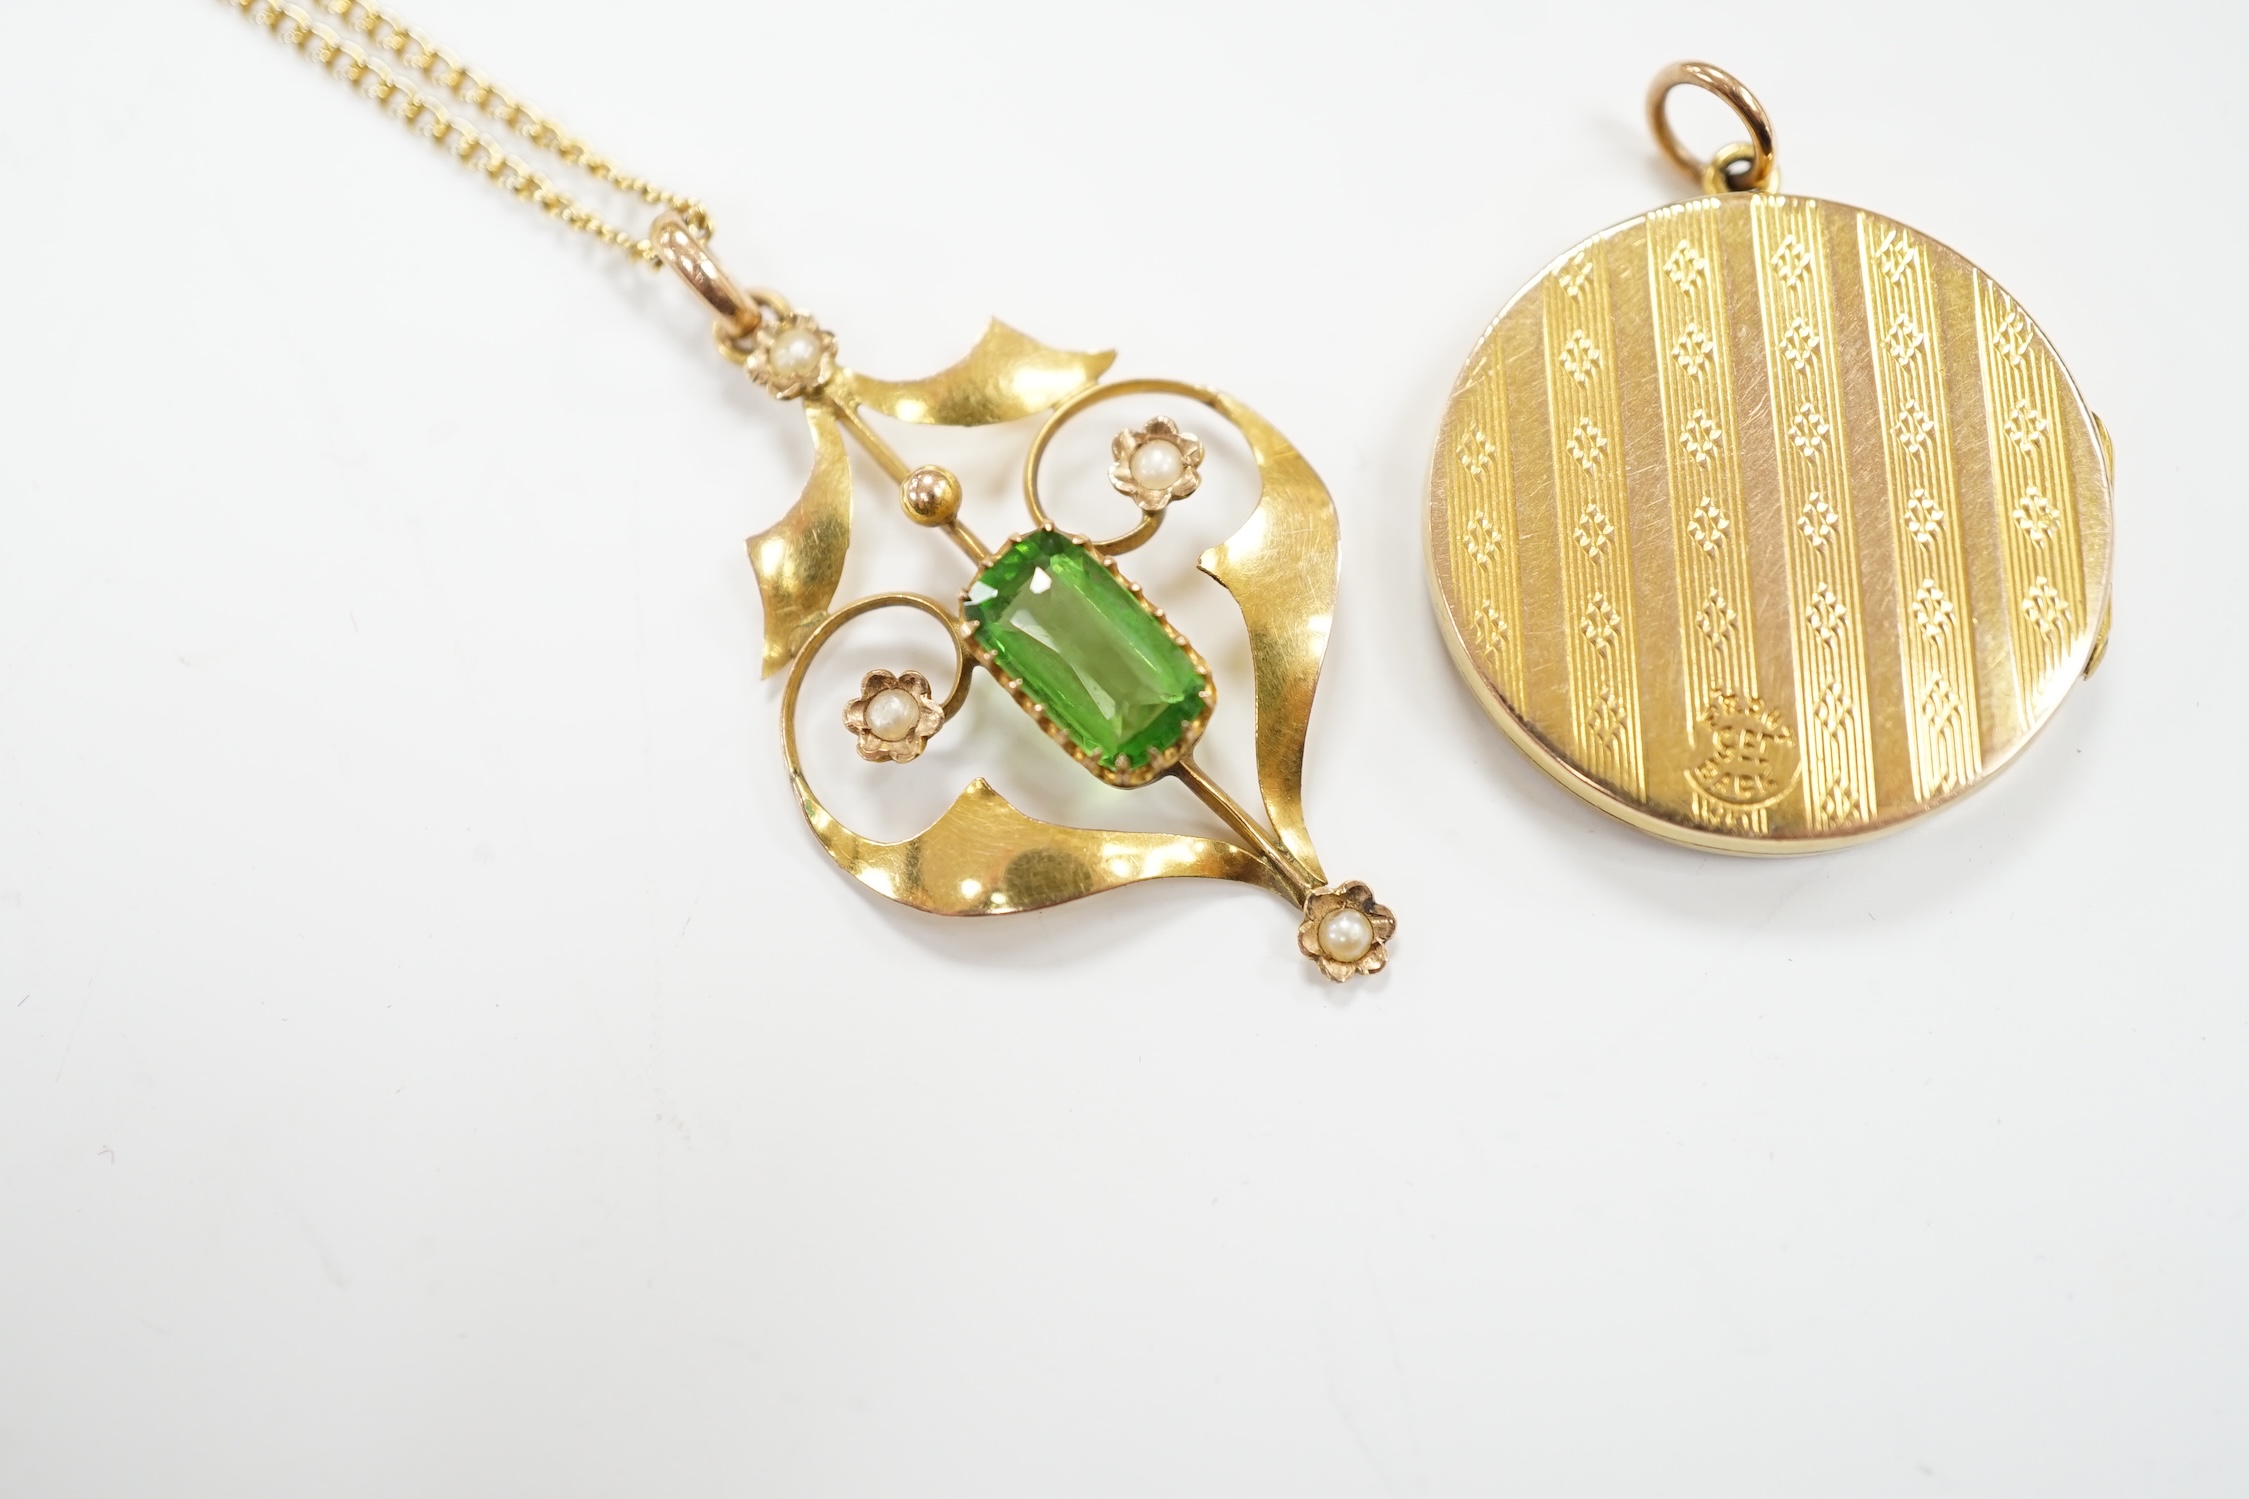 An Edwardian Art Nouveau 9ct, green tourmaline? and seed pearl set pendant, 37mm, on a gilt metal - Image 2 of 3